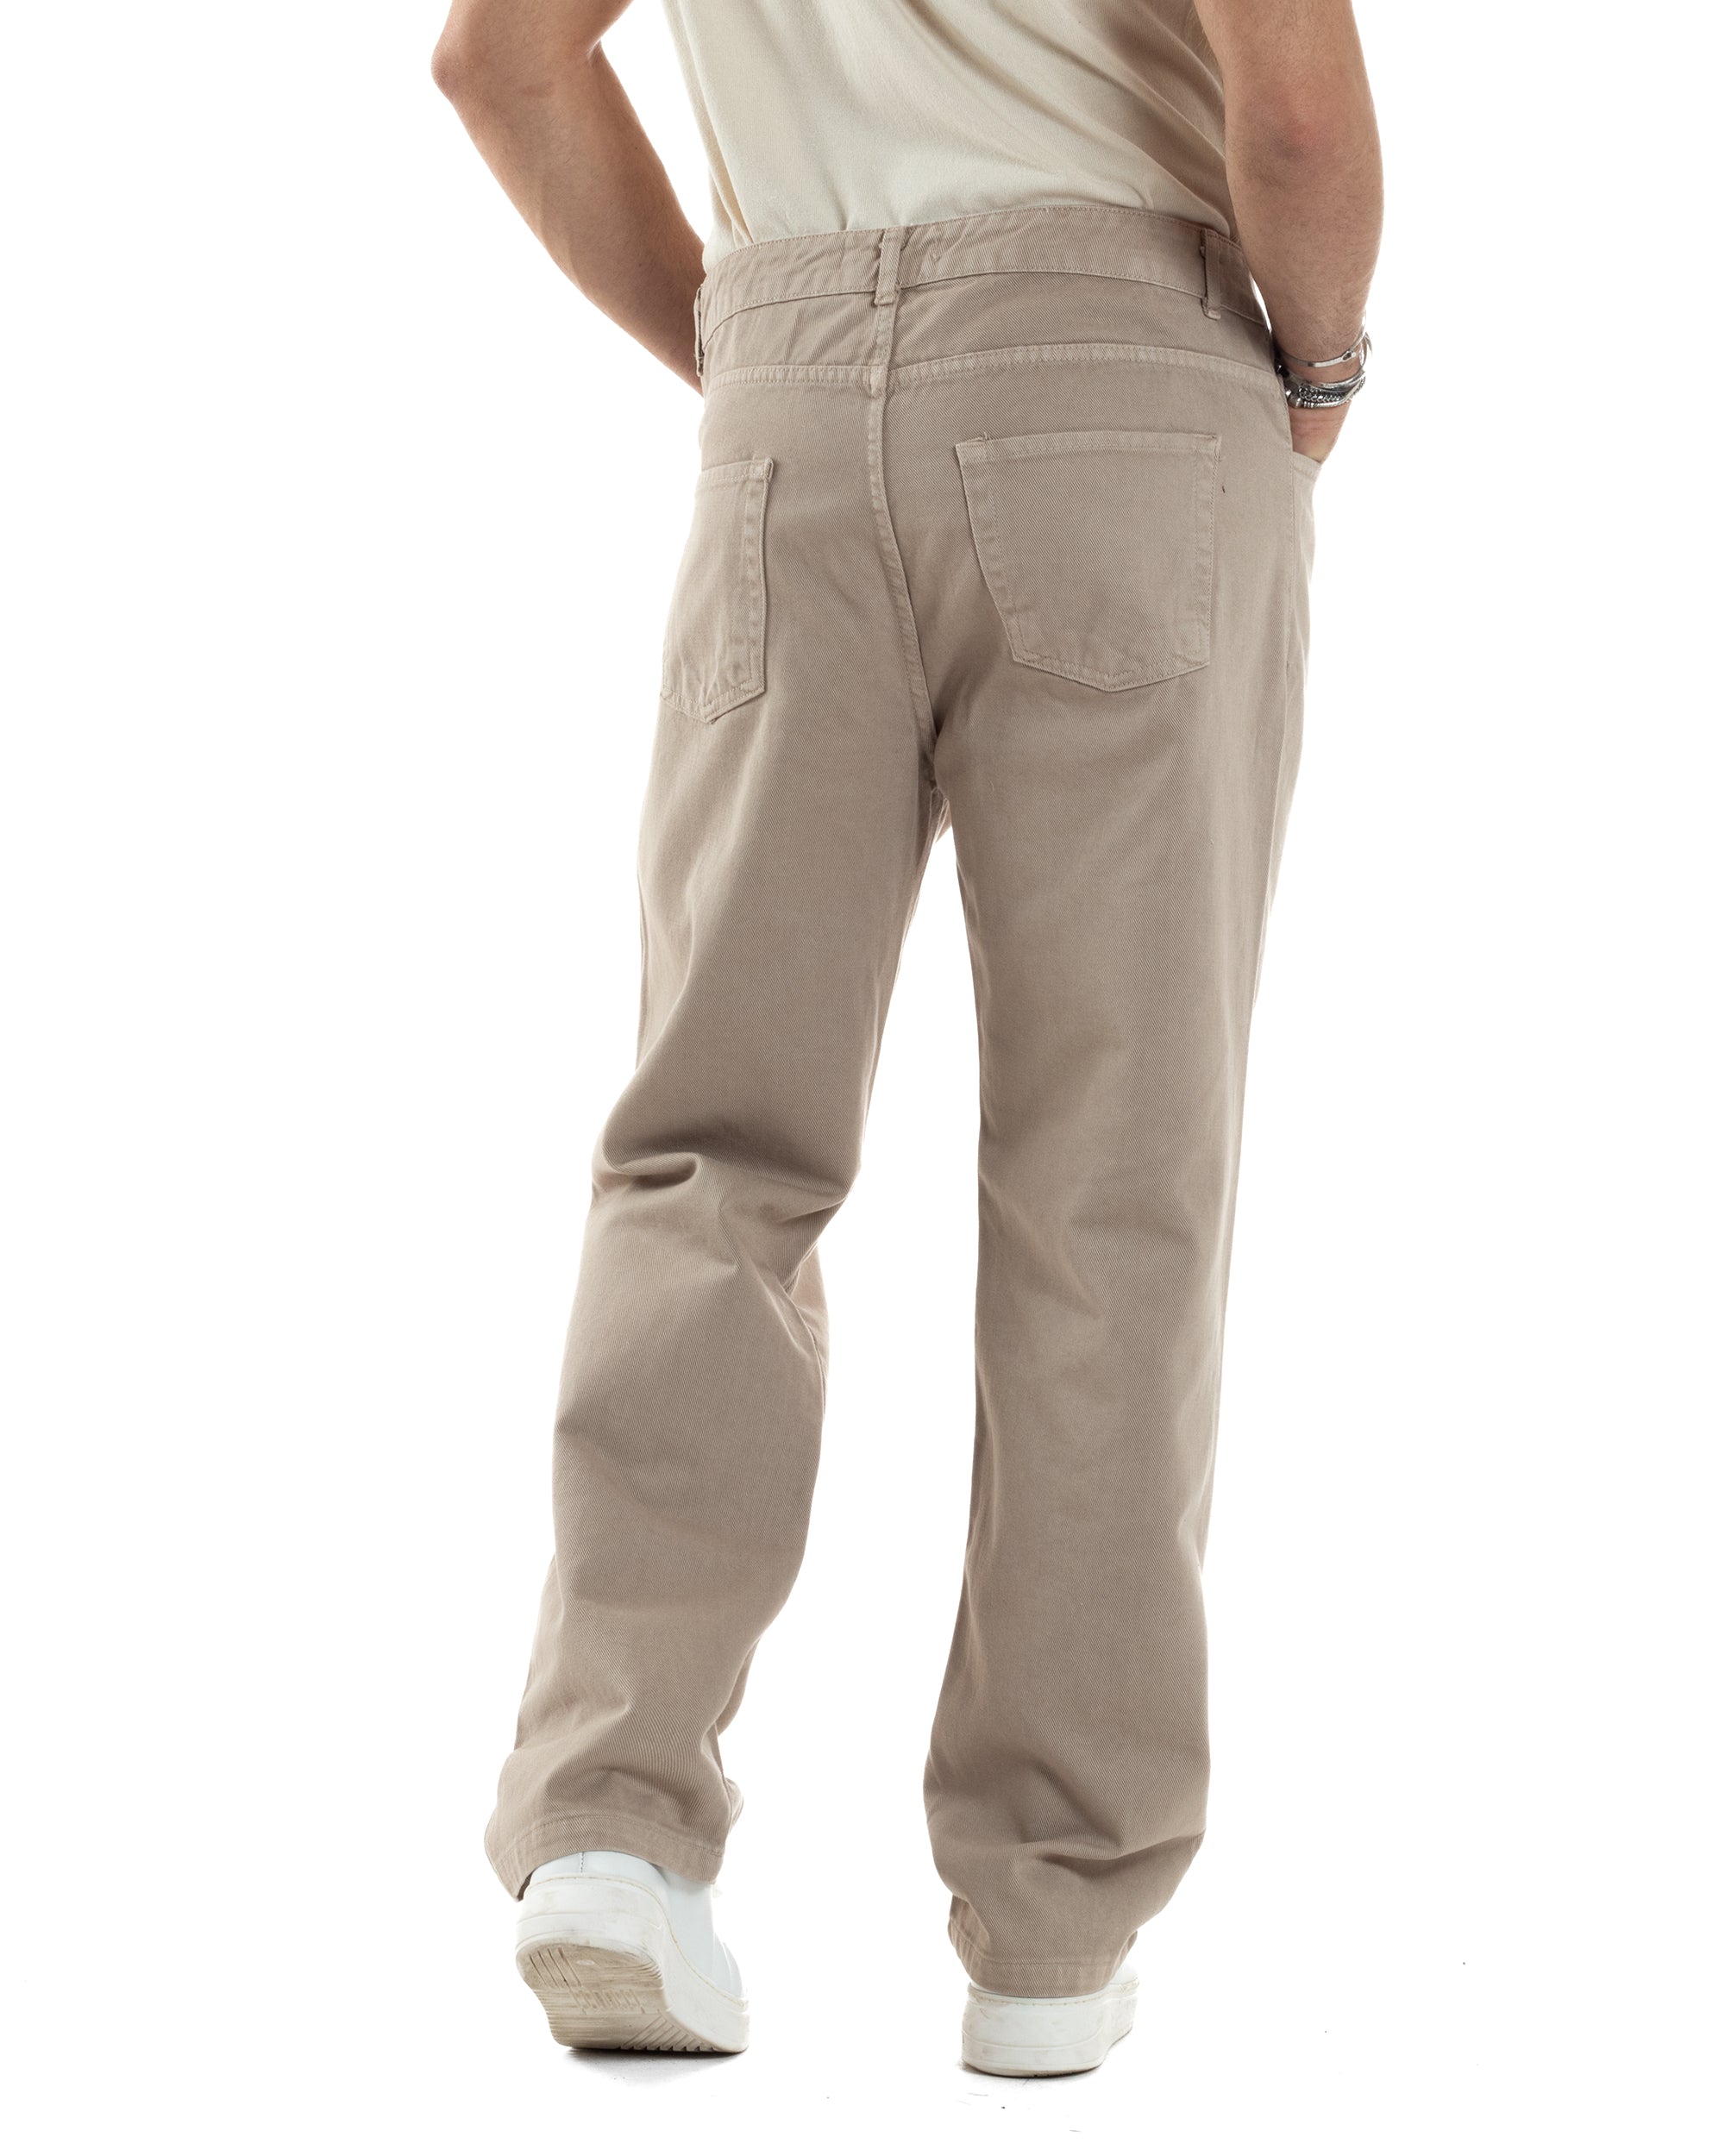 Pantaloni Uomo Jeans Straight Fit Baggy Basic Cinque Tasche Beige GIOSAL-JS1040A